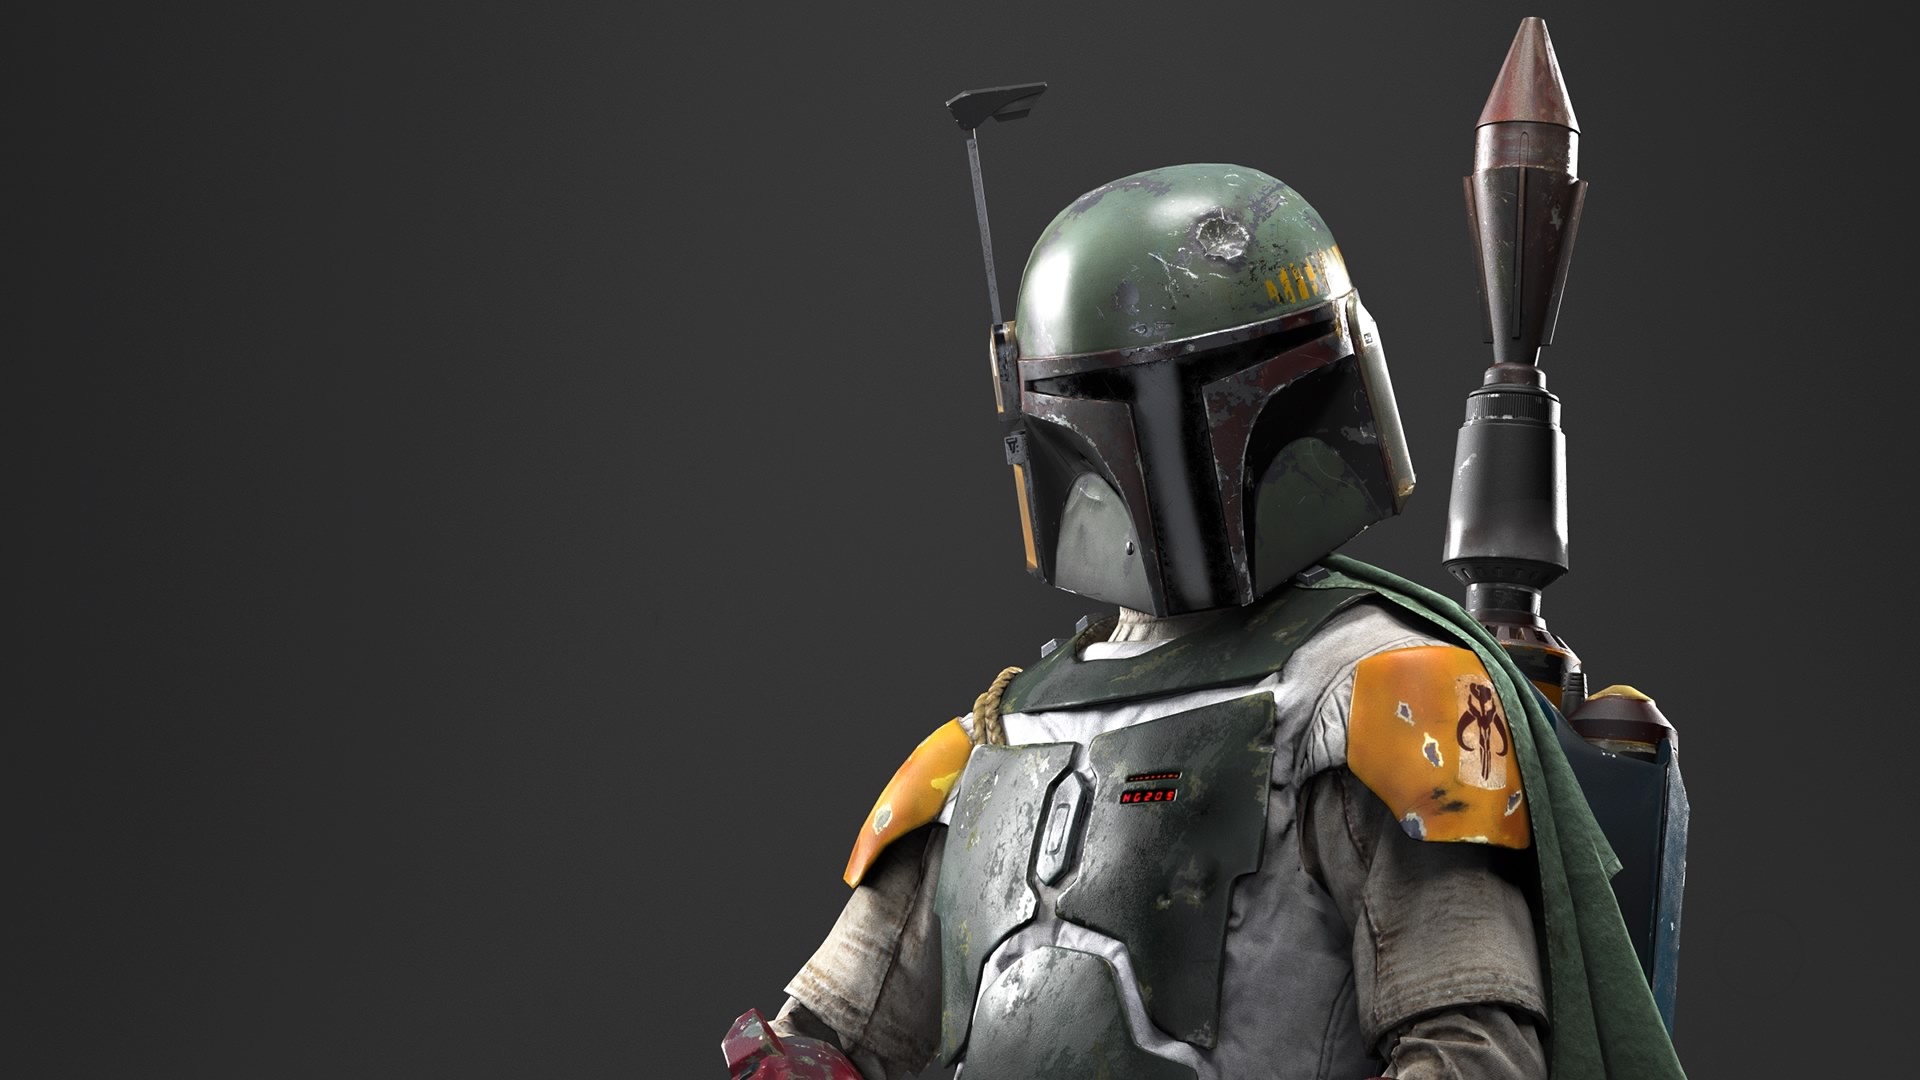 General 1920x1080 Star Wars Boba Fett Star Wars Villains simple background bounty hunter gray background science fiction Science Fiction Men movie characters